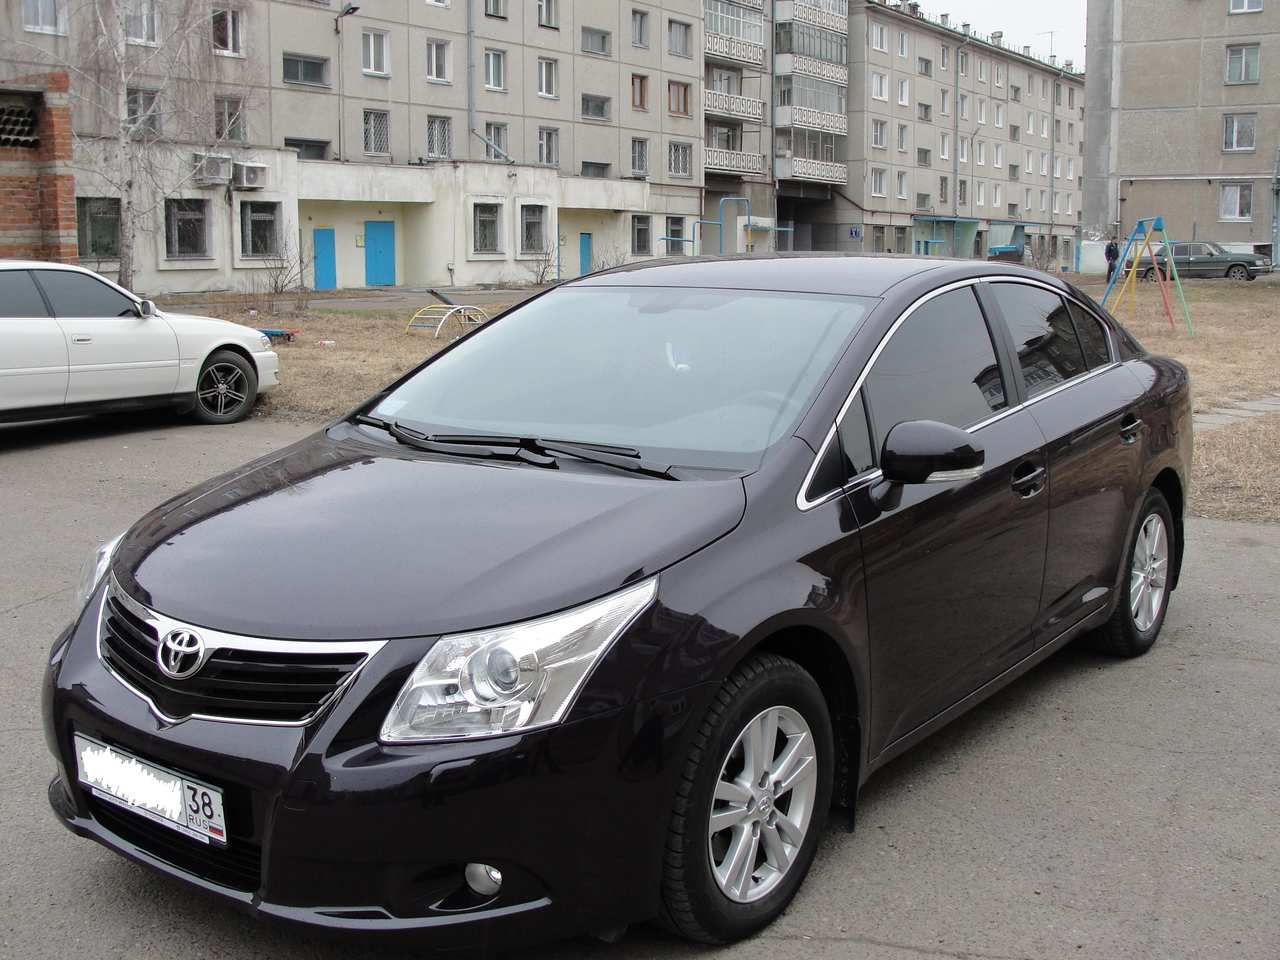 2009 Toyota Avensis specs, Engine size 1.8l., Fuel type